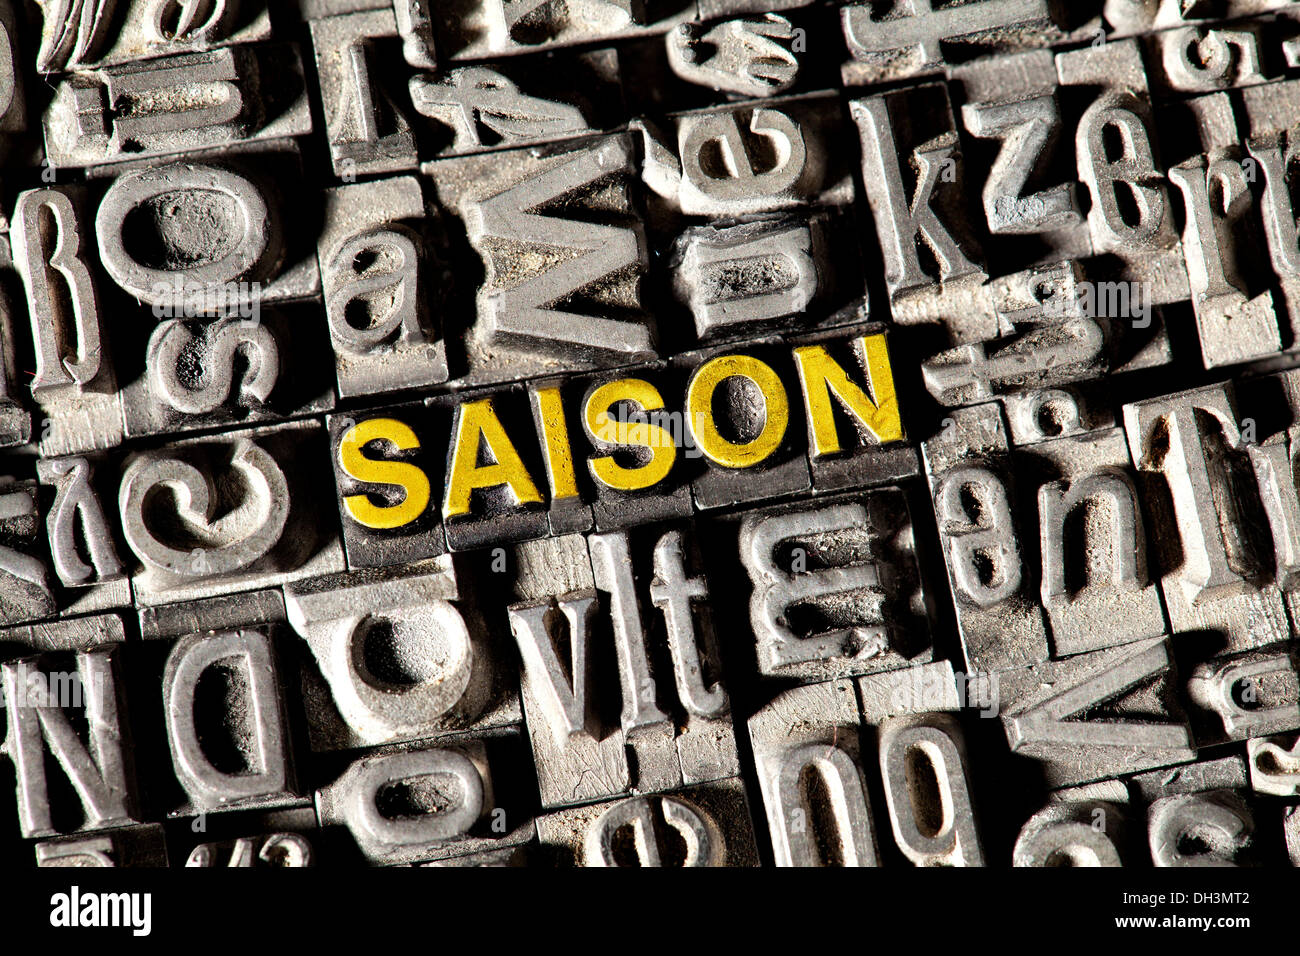 Old lead letters forming the word 'SAISON', German for 'SEASON' Stock Photo